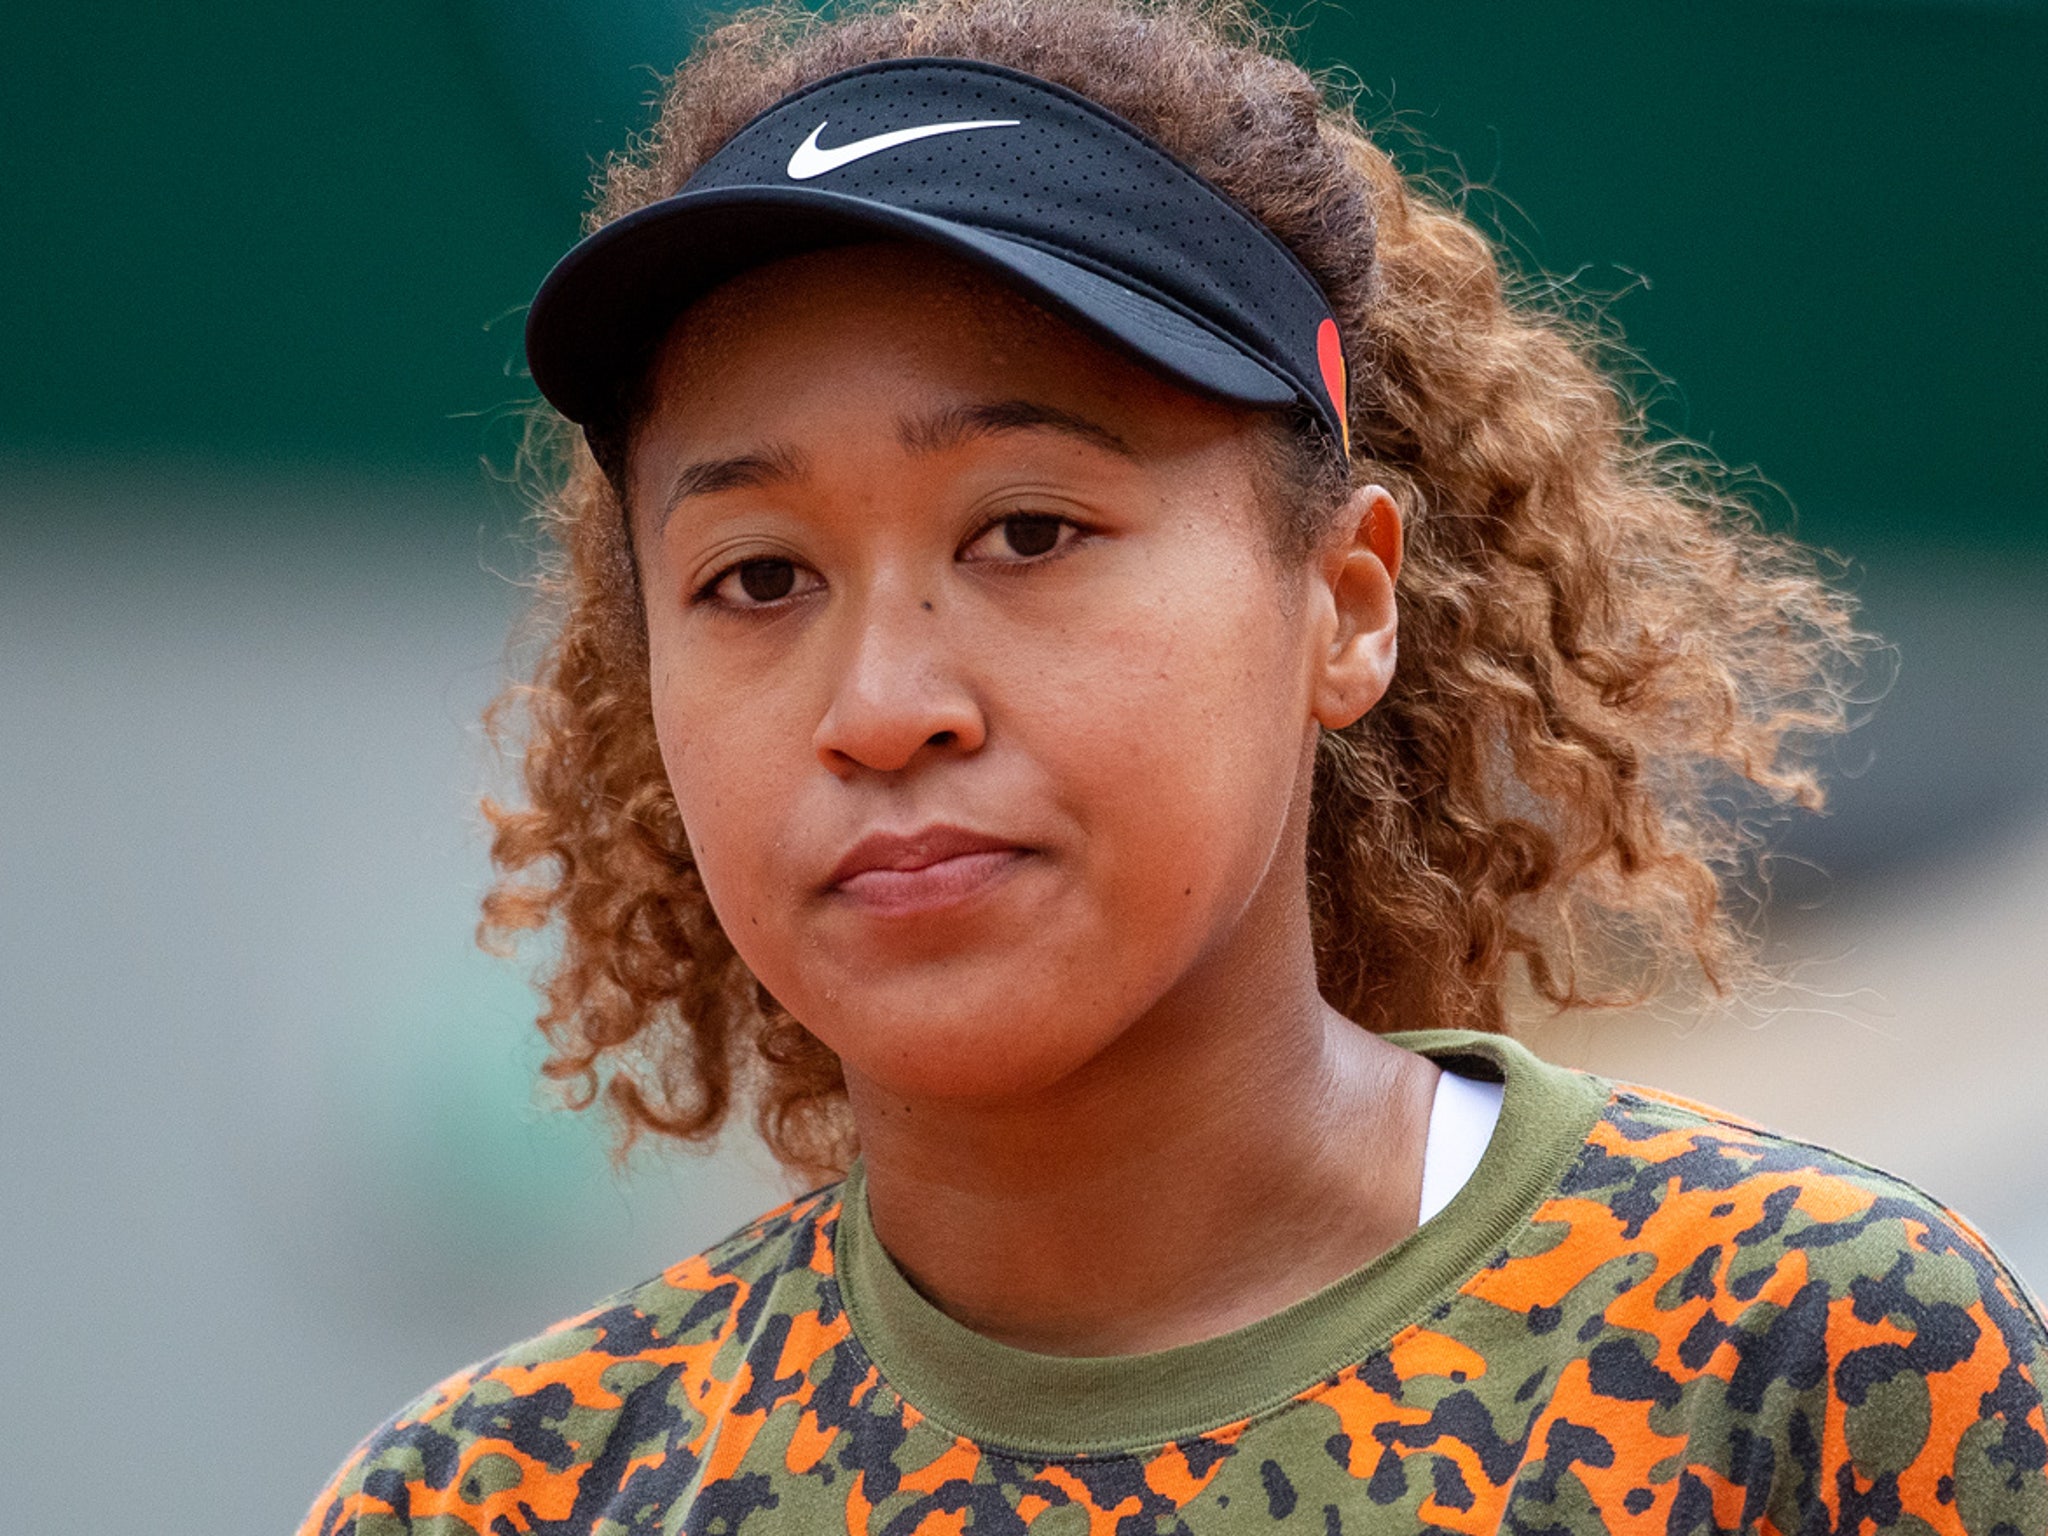 Naomi Osaka To Skip Reporters At The French Open To Protect Mental